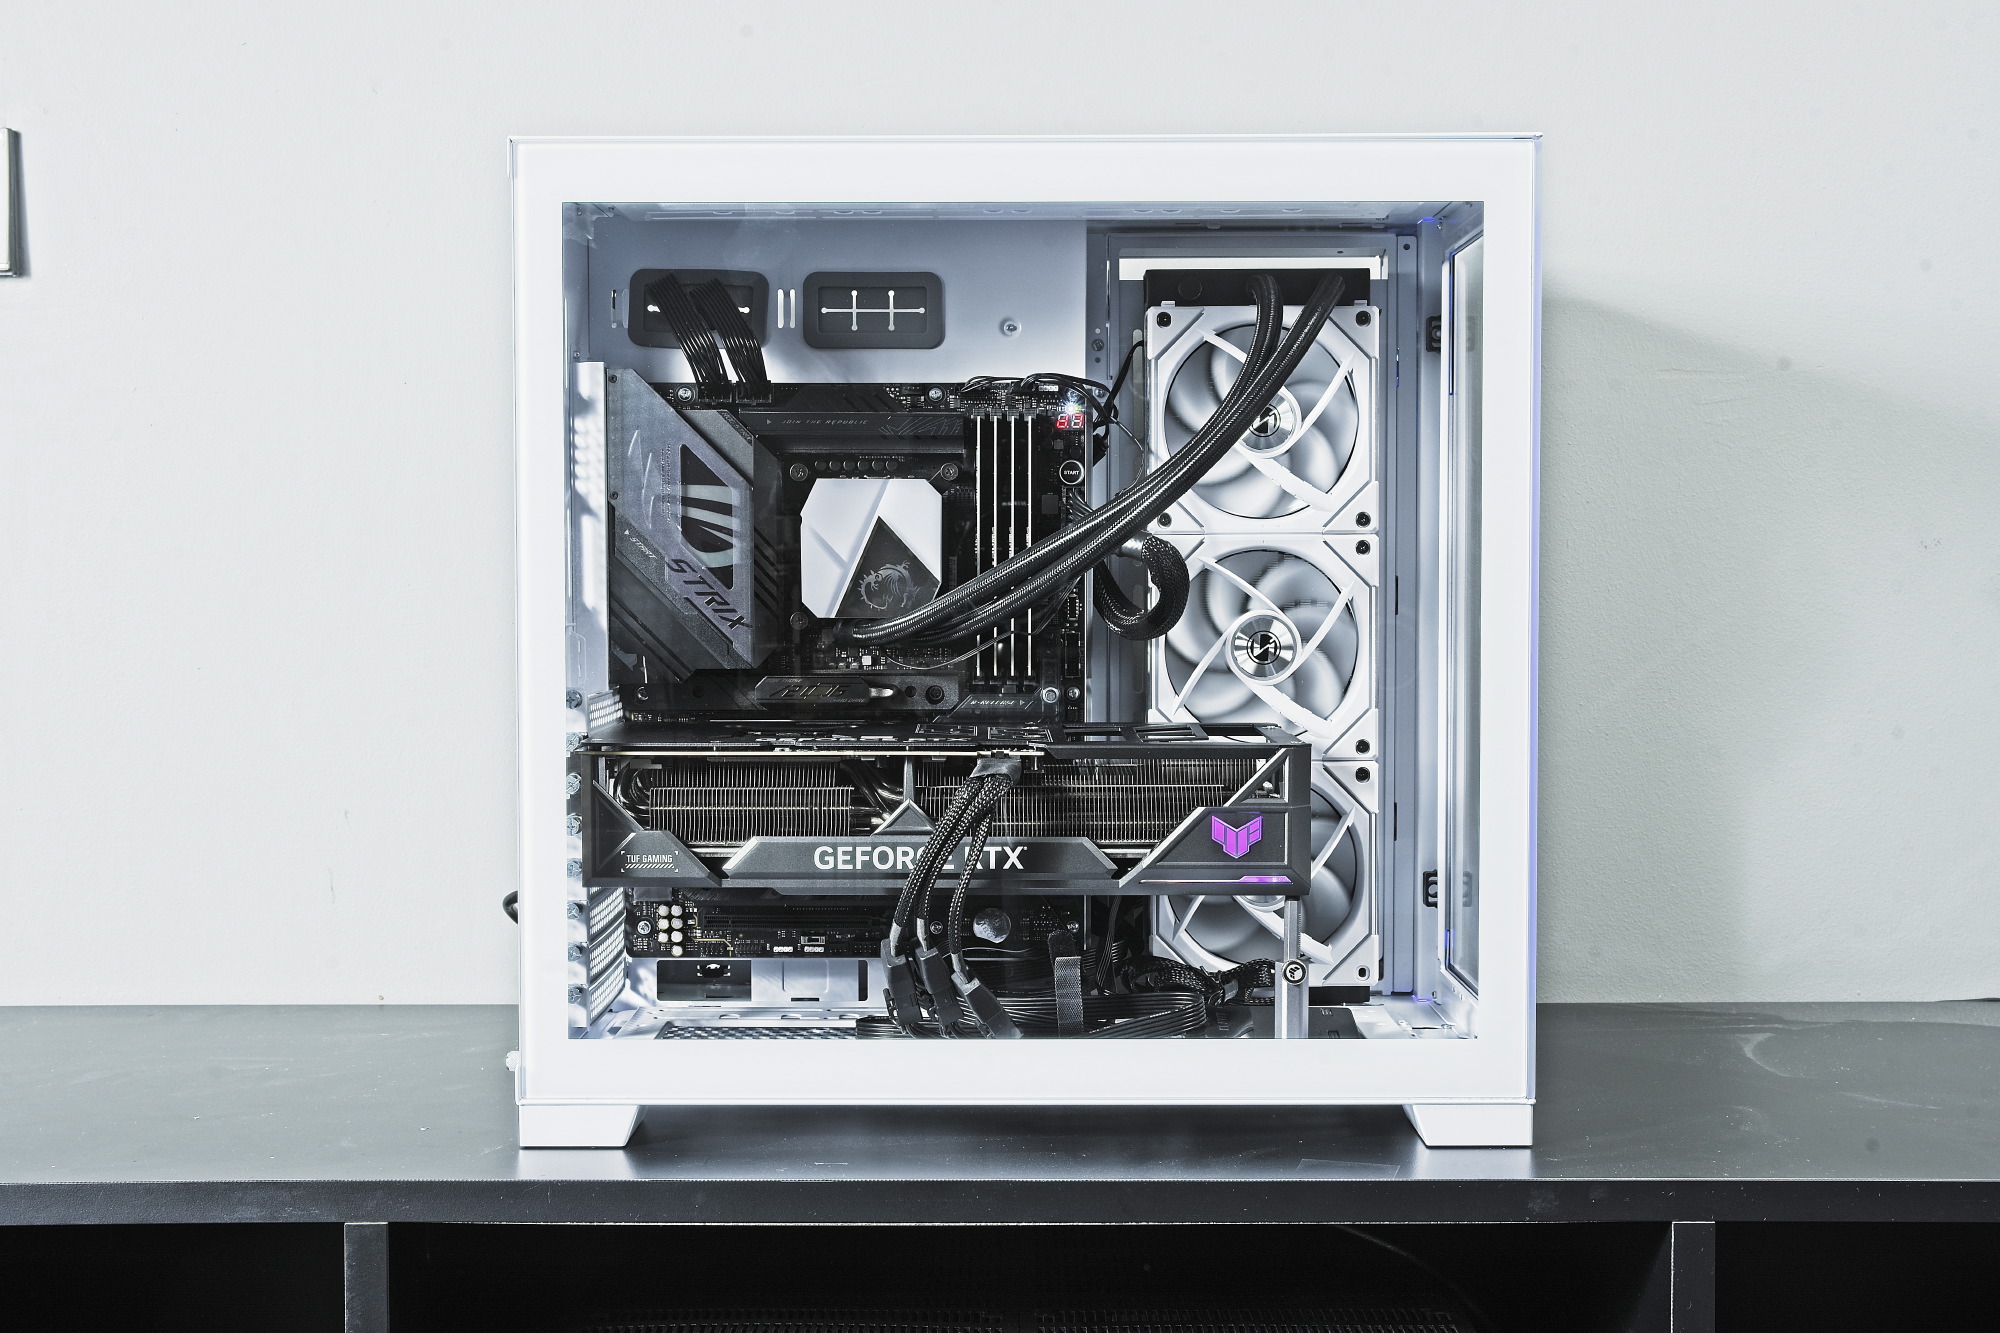 Introducing the TG PC 2023, a topend gaming rig you can build yourself